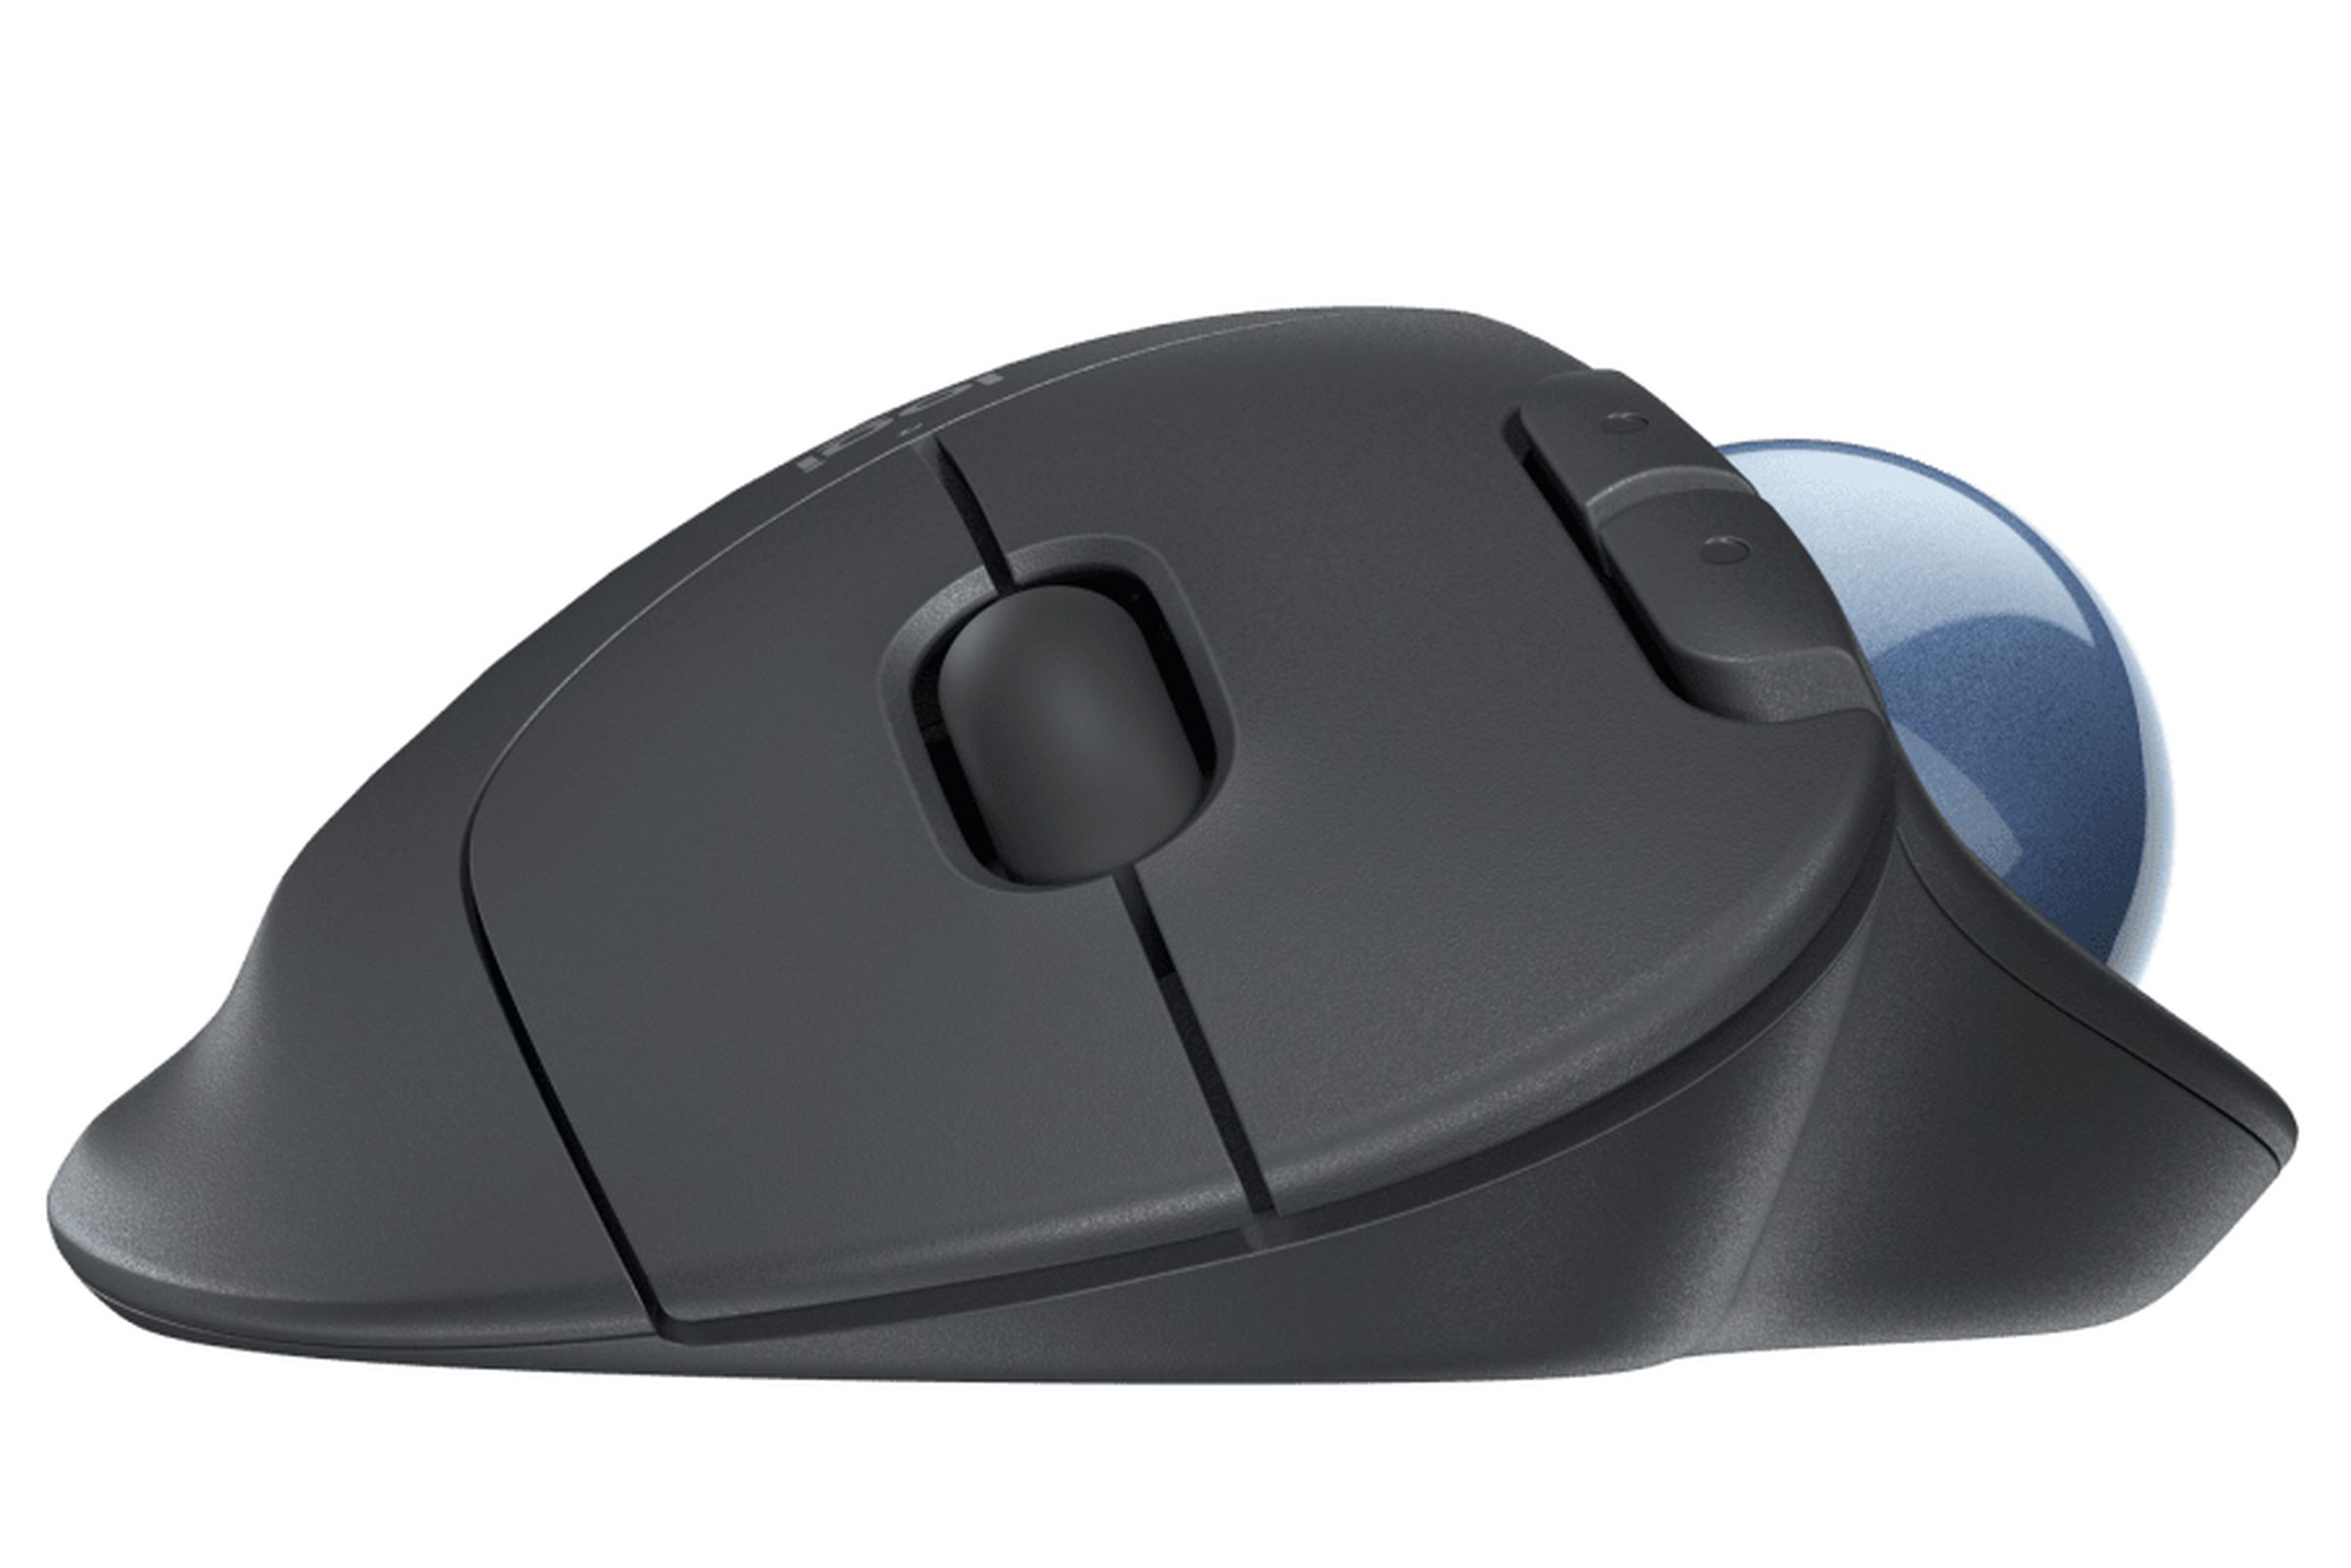 Move the cursor by using your thumb to control the trackball.